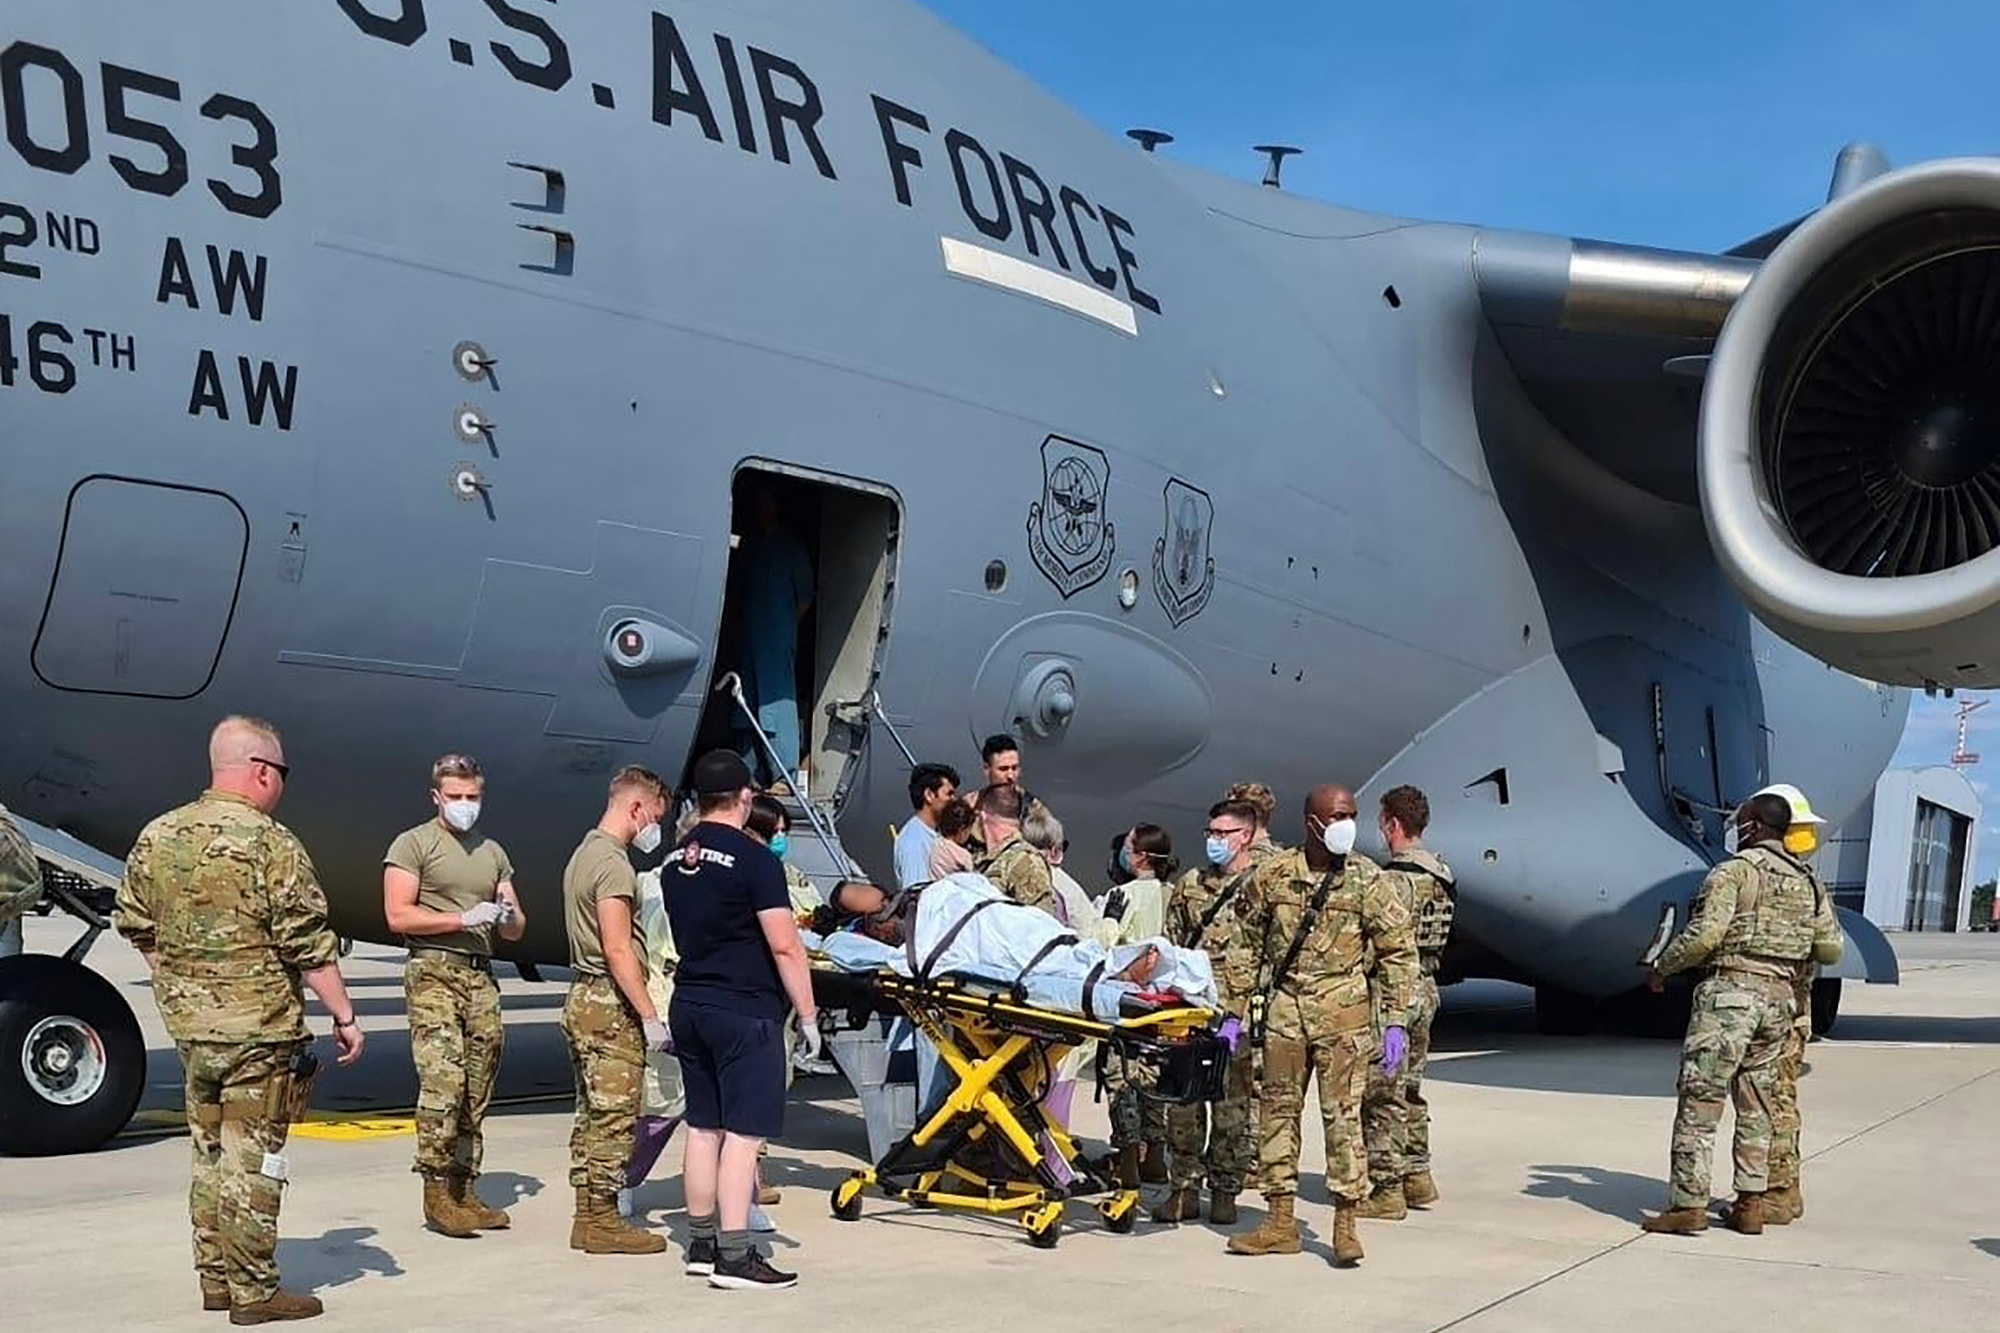 PHOTO: Medical support personnel from the 86th Medical Group help an Afghan mother and family off a U.S. Air Force C-17, after she delivered a child aboard the aircraft upon landing at Ramstein Air Base, Germany, Aug. 21, 2021. 